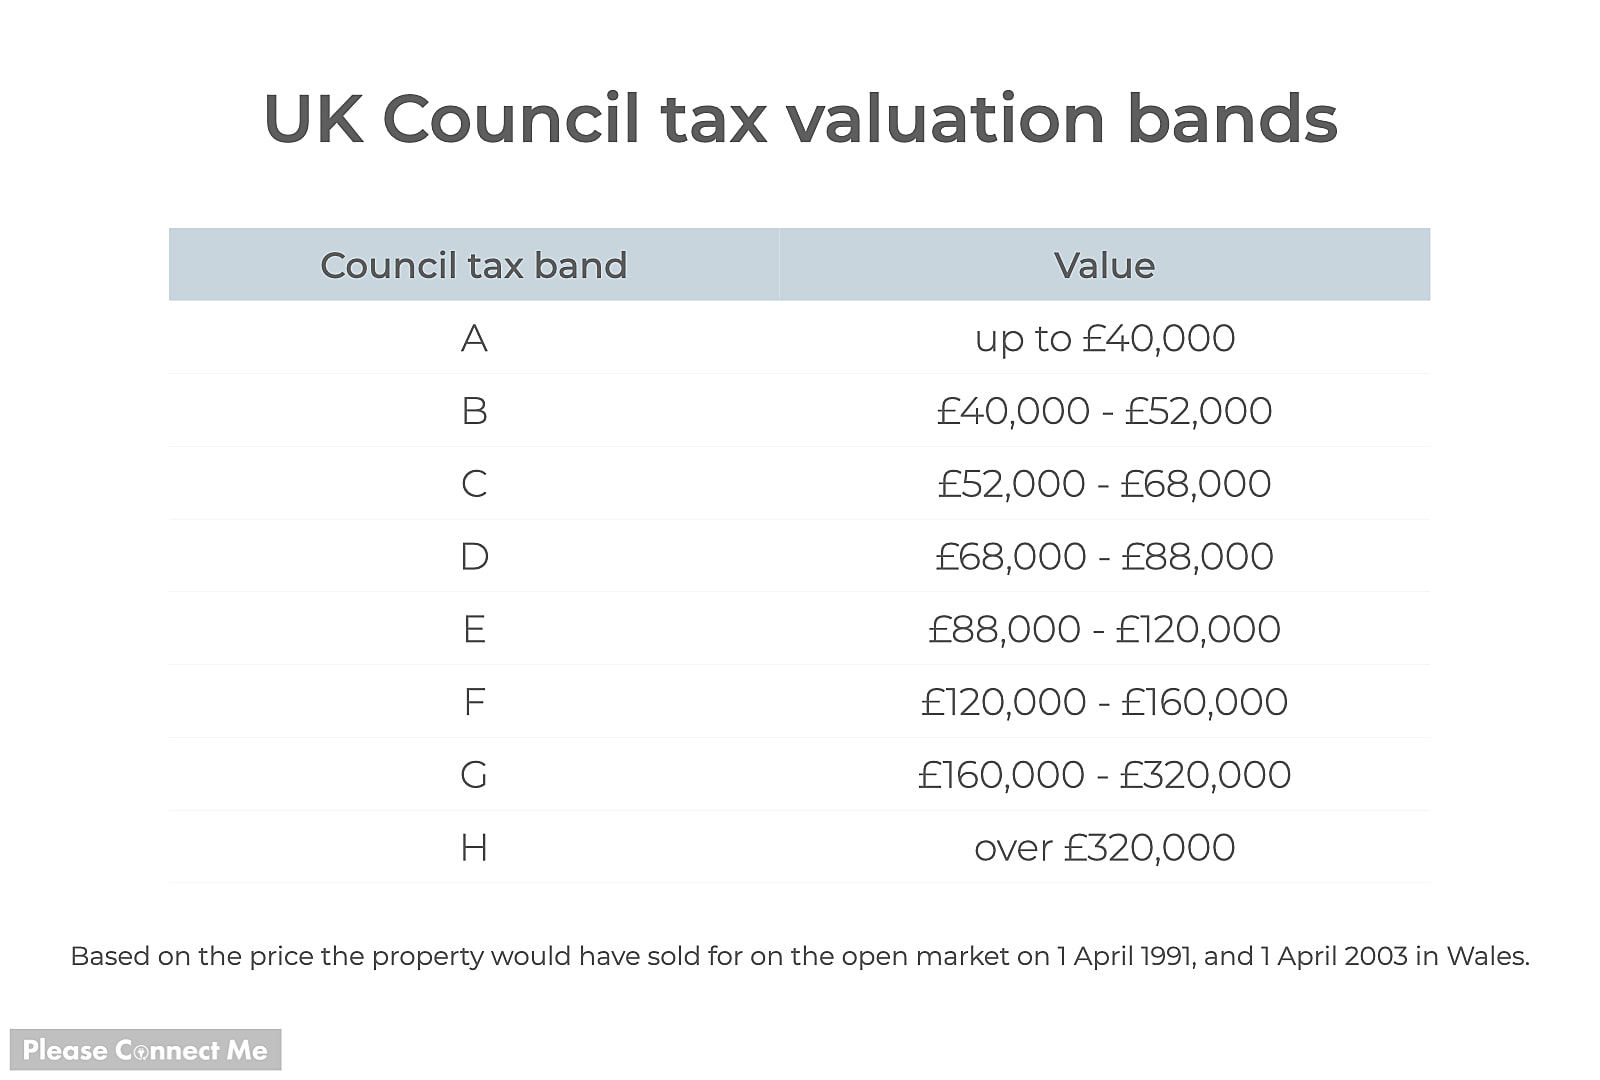 Table showing UK council tax valuation bands